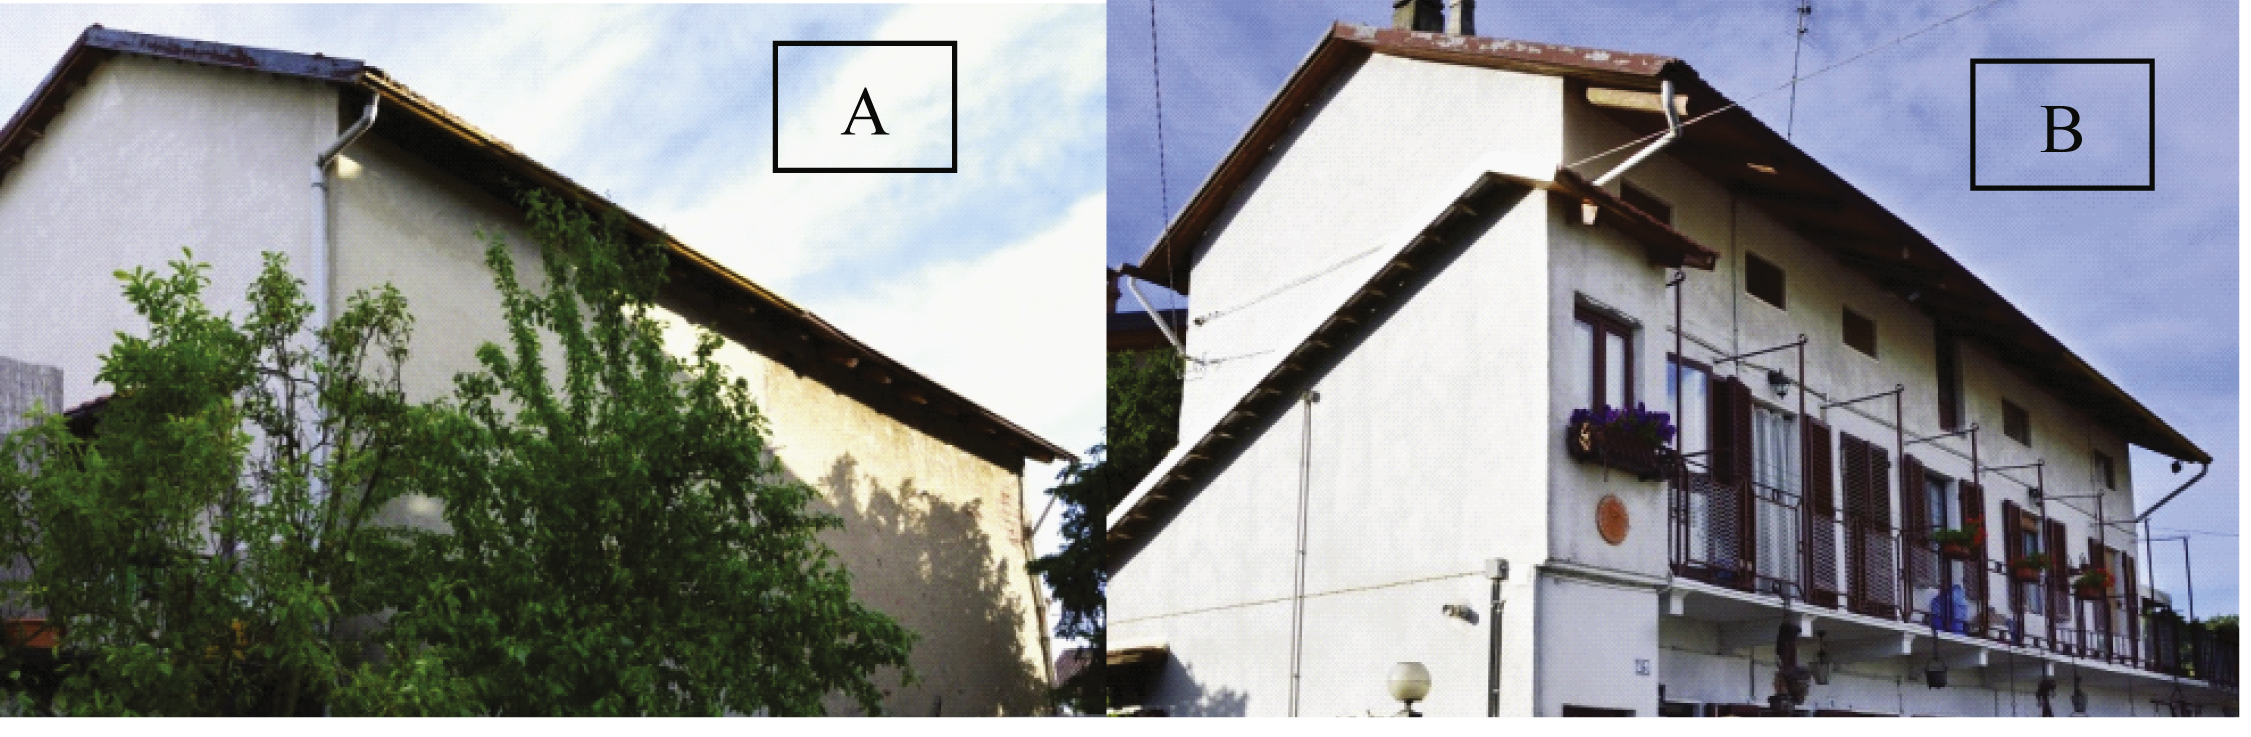 Typical example of building envelope optimization in traditional architecture, based on the classical approach of the ‘energy conservation’ – HHD = 2894°C·d, winter design temperature – 8°C, summer design temperature 32°C, CDD = 386°C·d – (ASHRAE, 2013) (A: north exposition; B: south exposition).